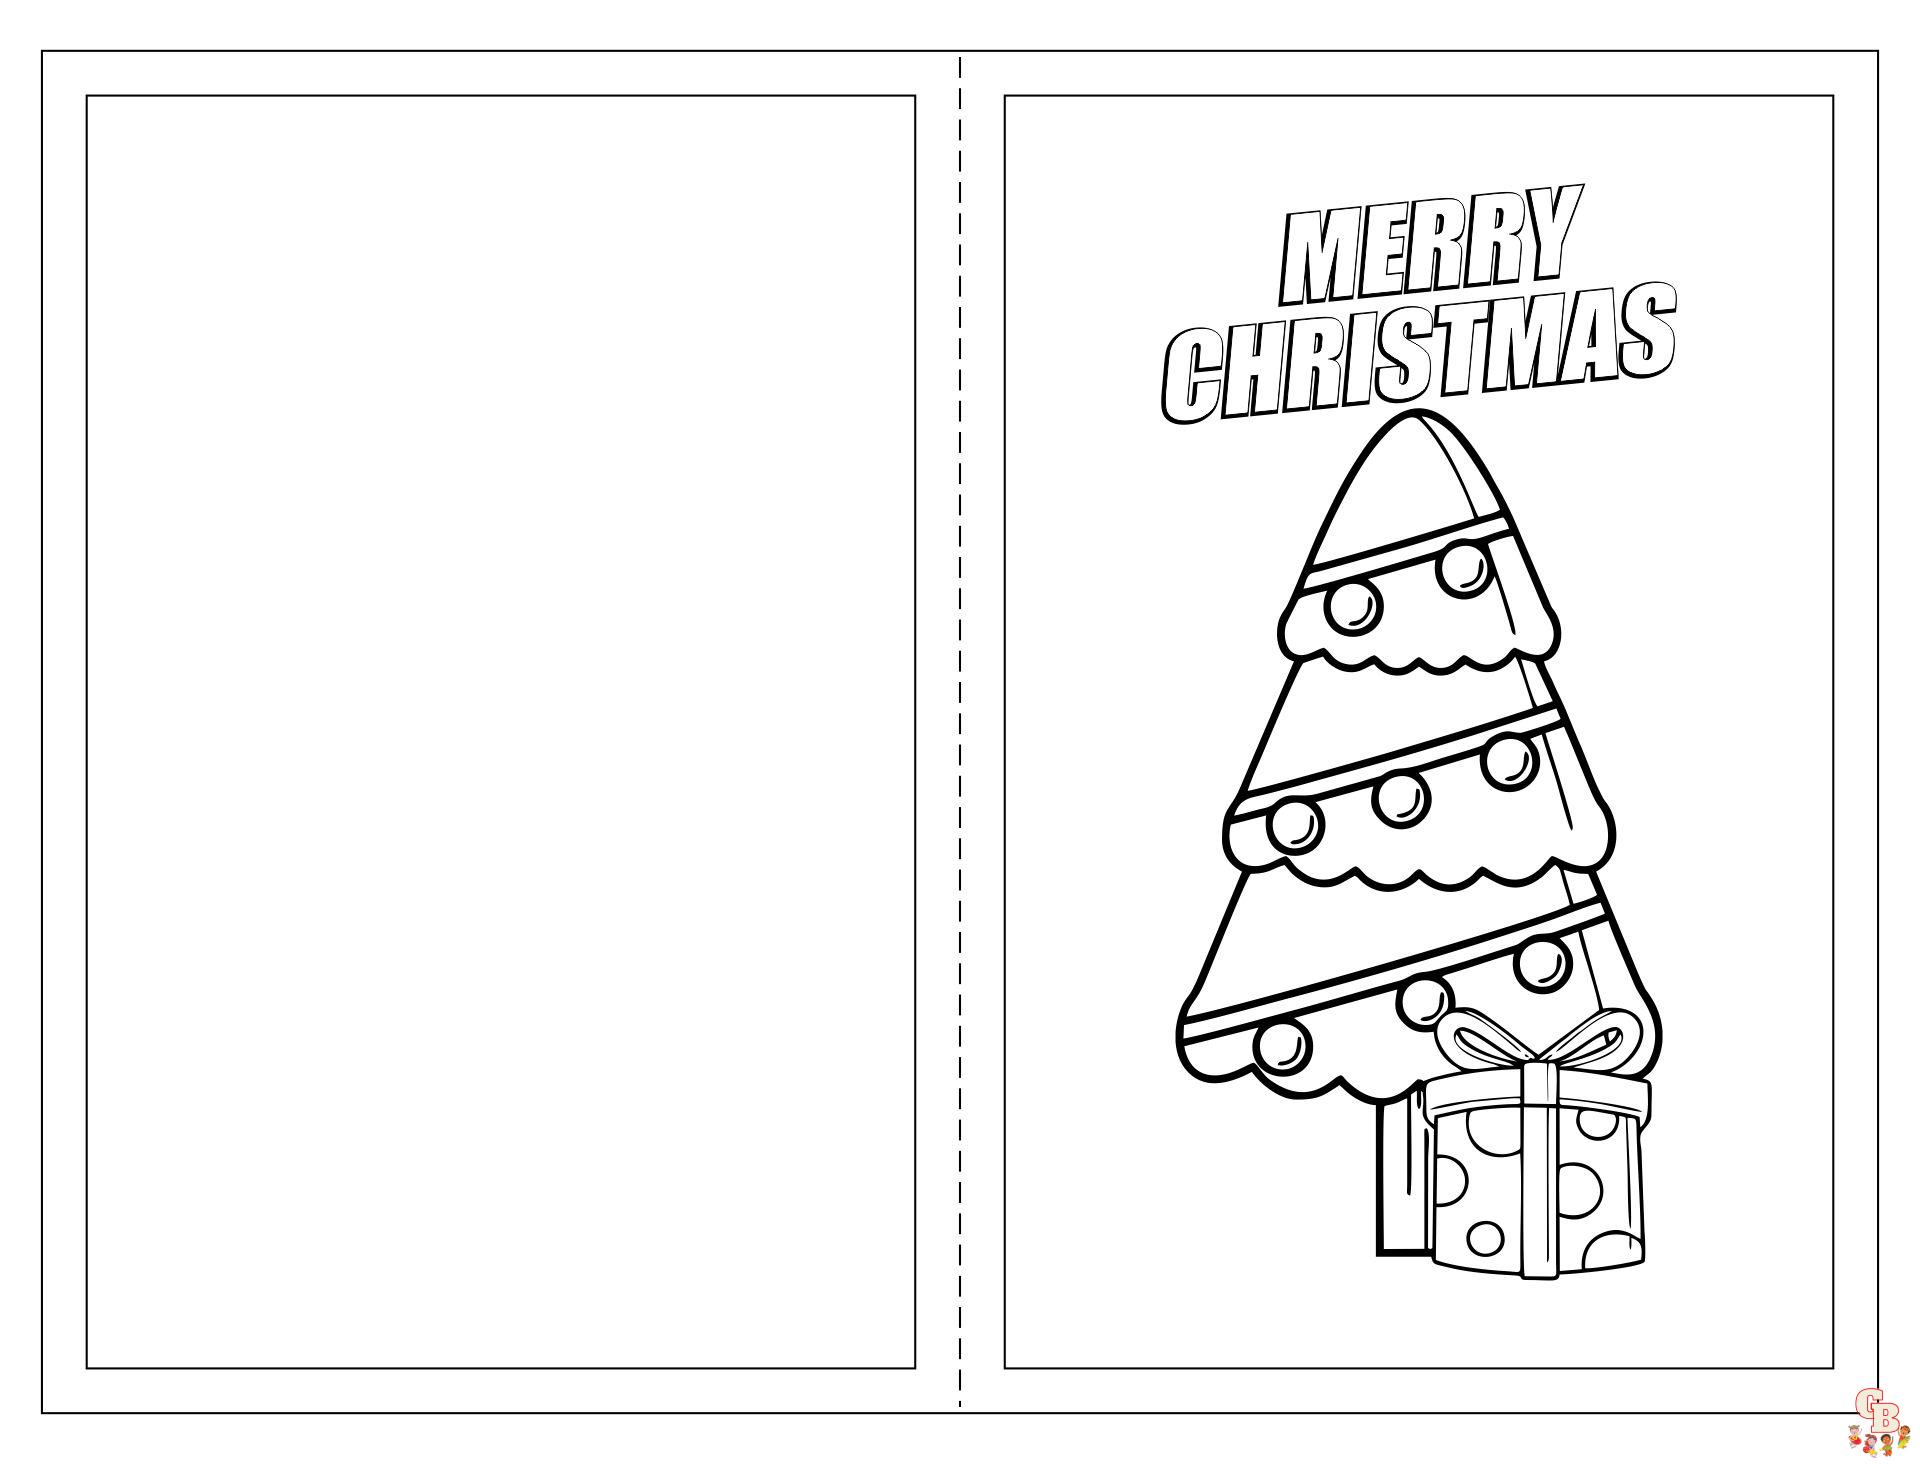 Christmas Cards Coloring Pages 5